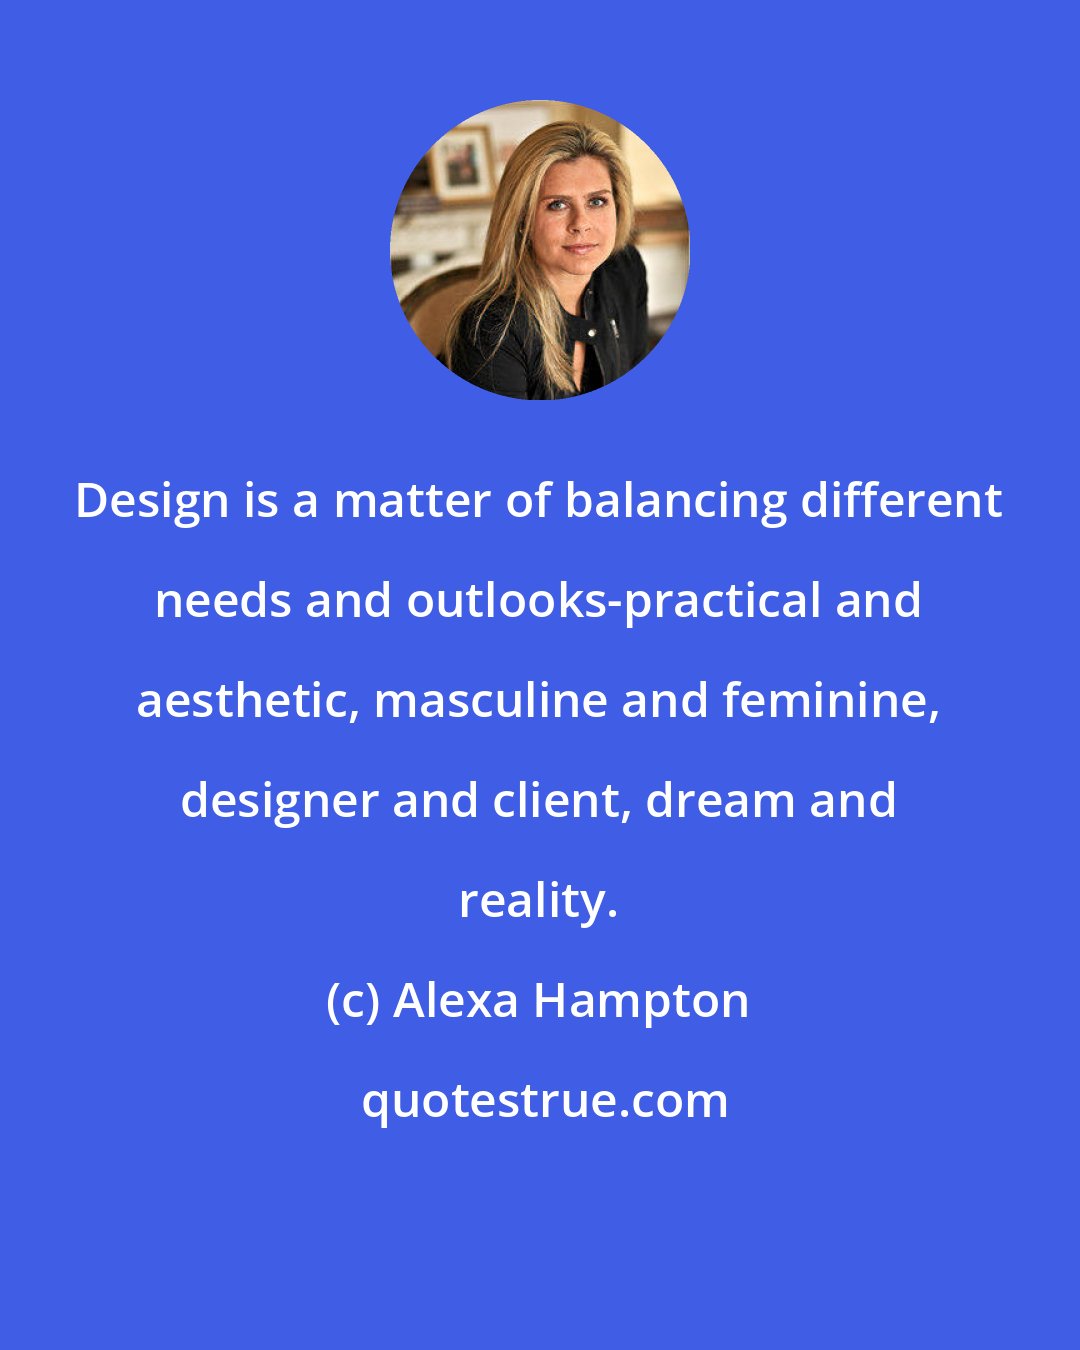 Alexa Hampton: Design is a matter of balancing different needs and outlooks-practical and aesthetic, masculine and feminine, designer and client, dream and reality.